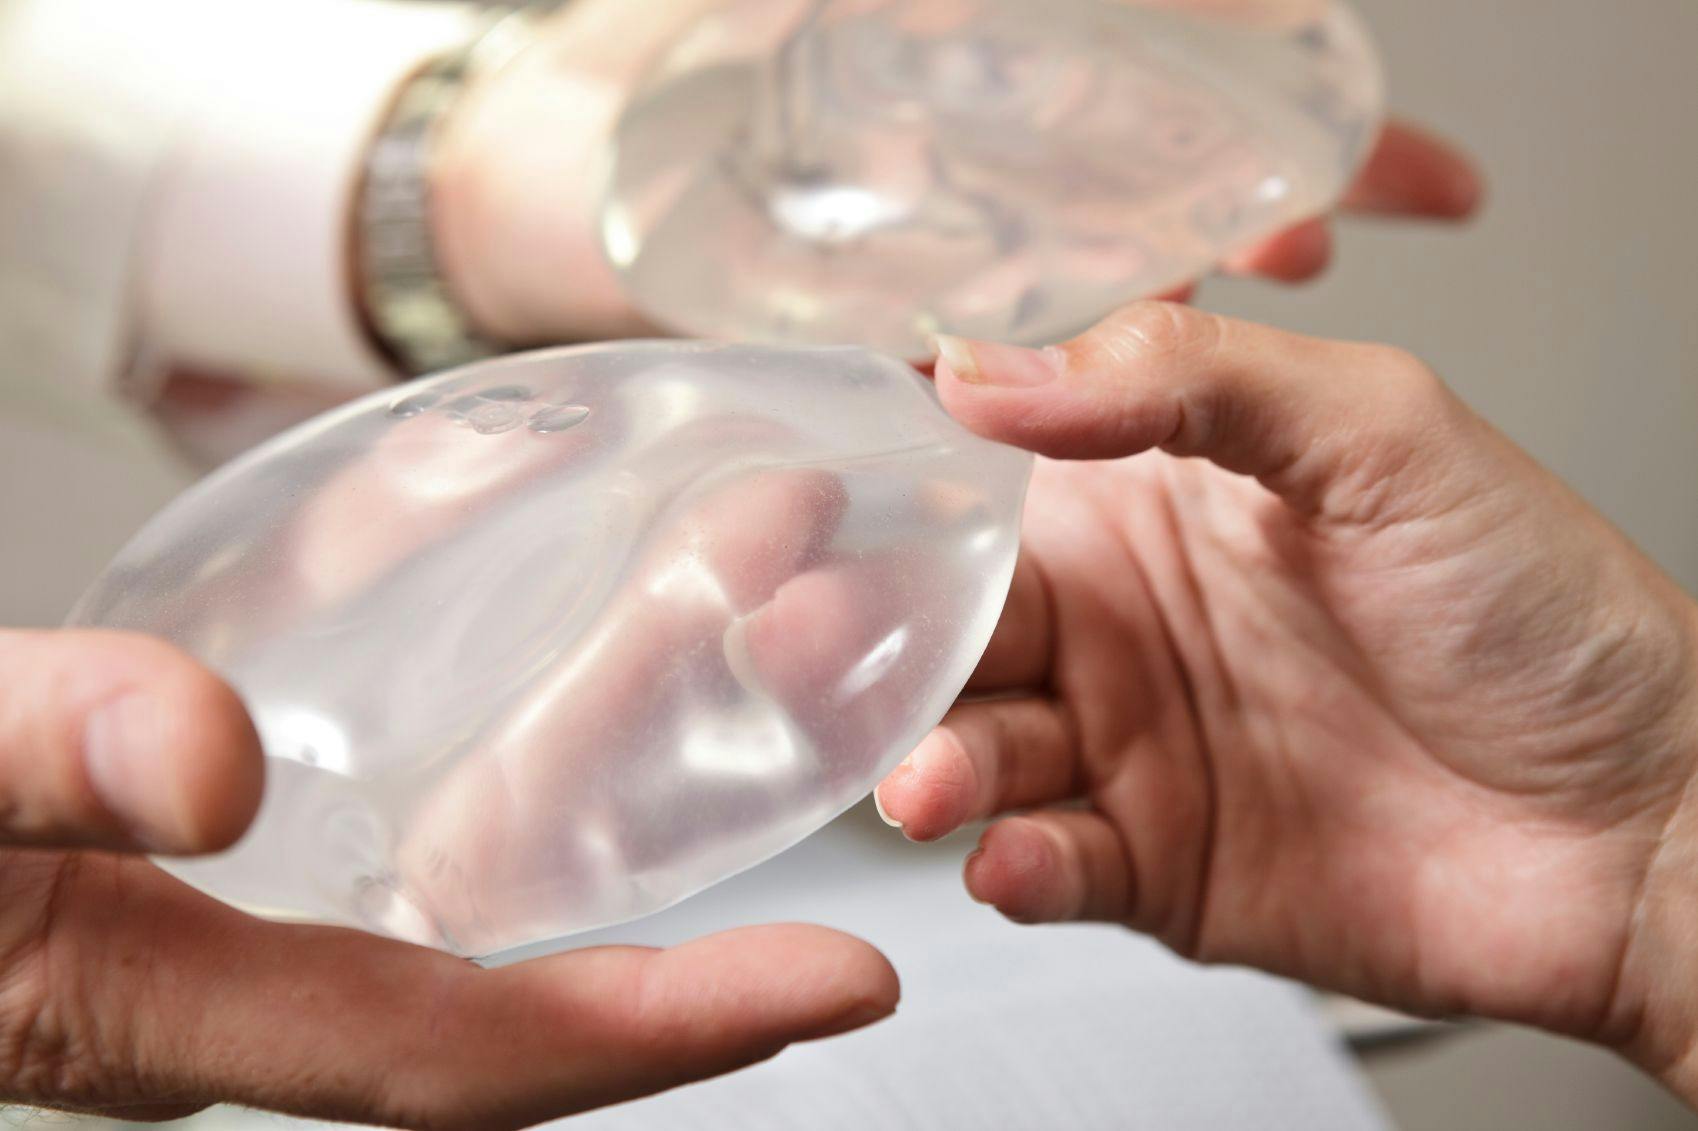 FDA’s New Recommendations on Risk of Breast Implants an ‘Enormous Step Forward’ For Patients With Breast Cancer